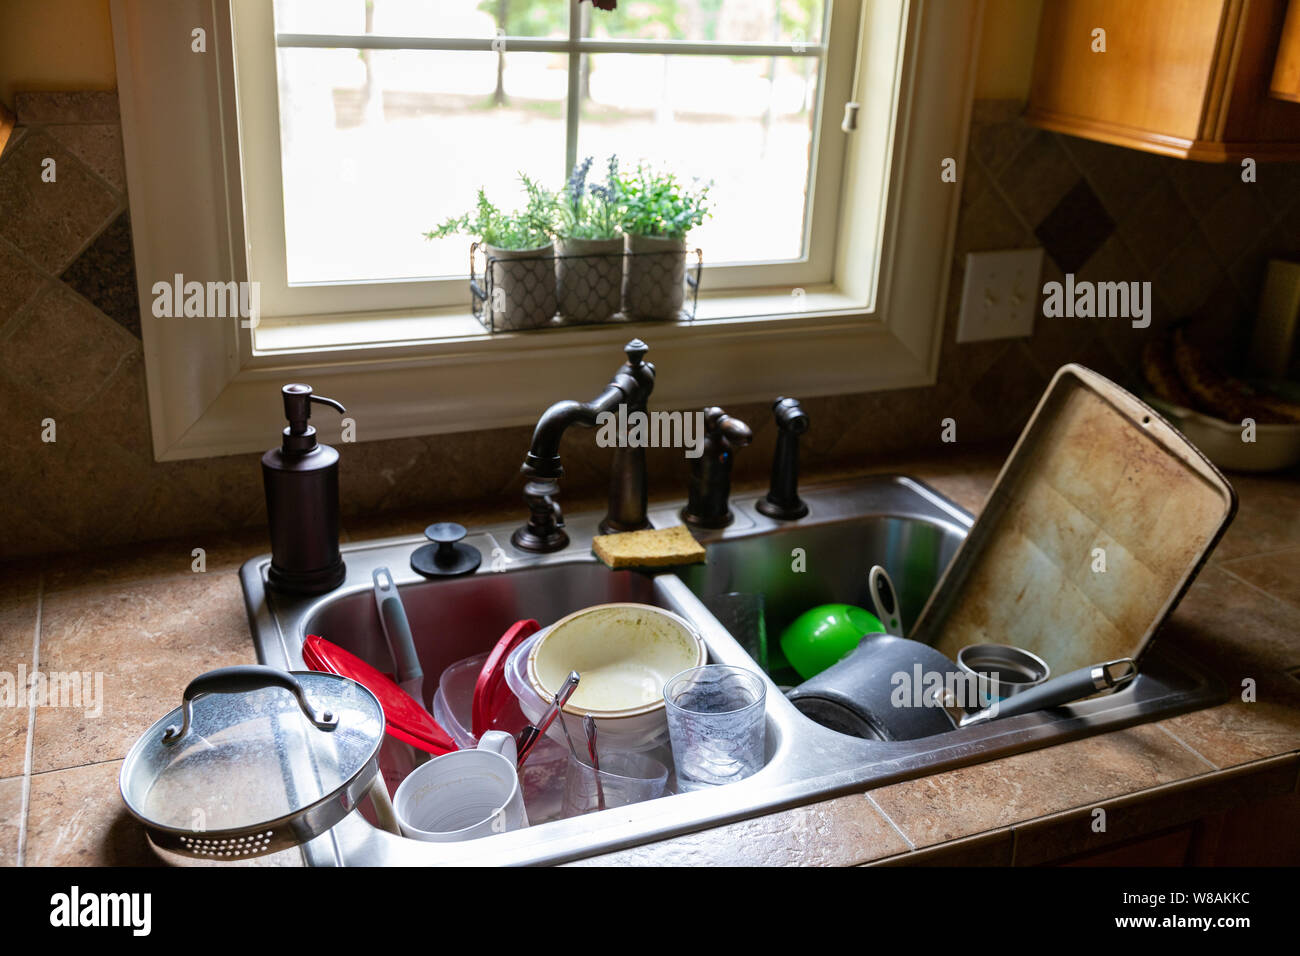 Stack of dirty dishes piled into the kitchen sink Stock Photo